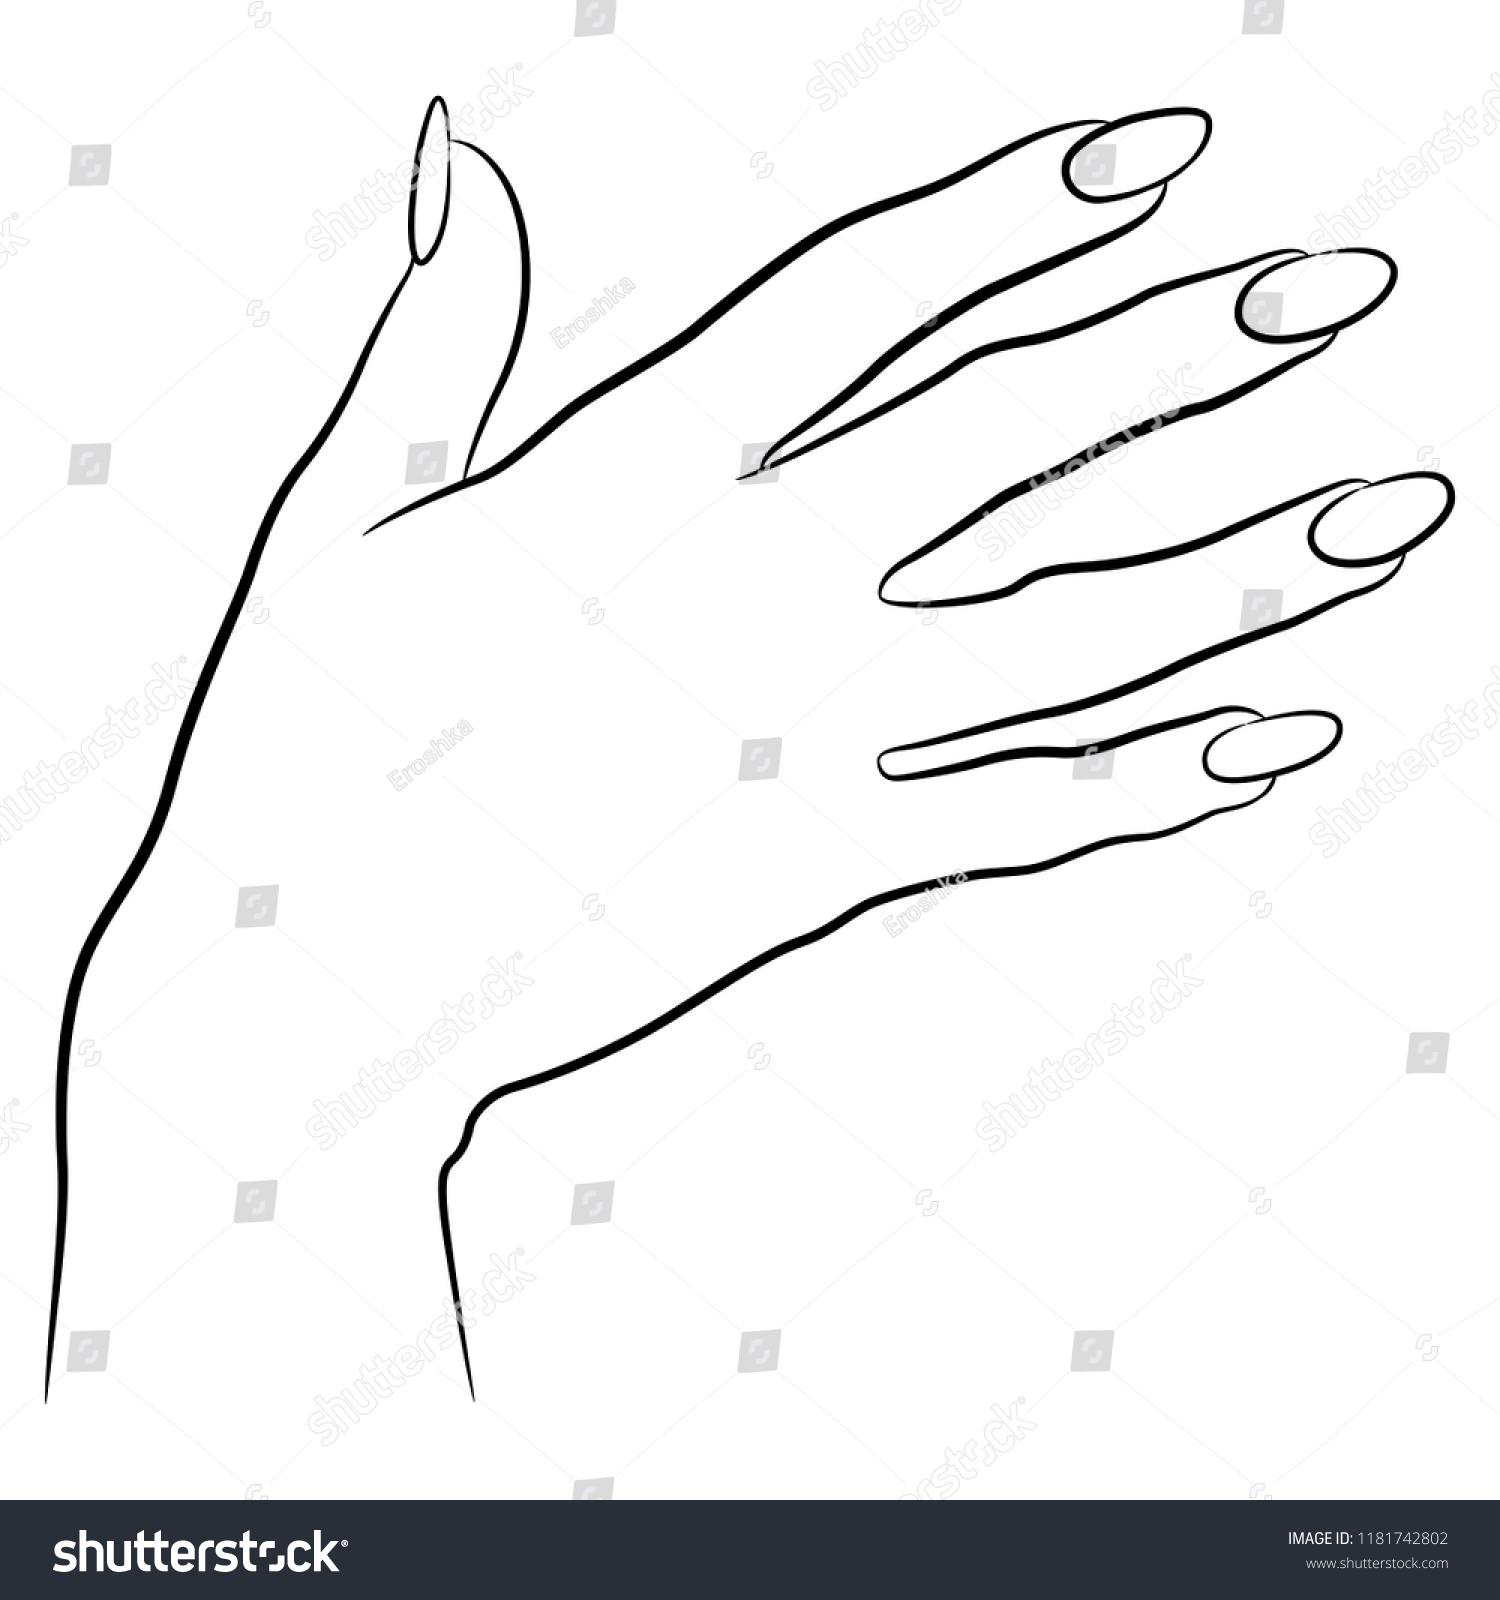 Isolated Vector Illustration Beautiful Female Hand Stock Vector Royalty Free